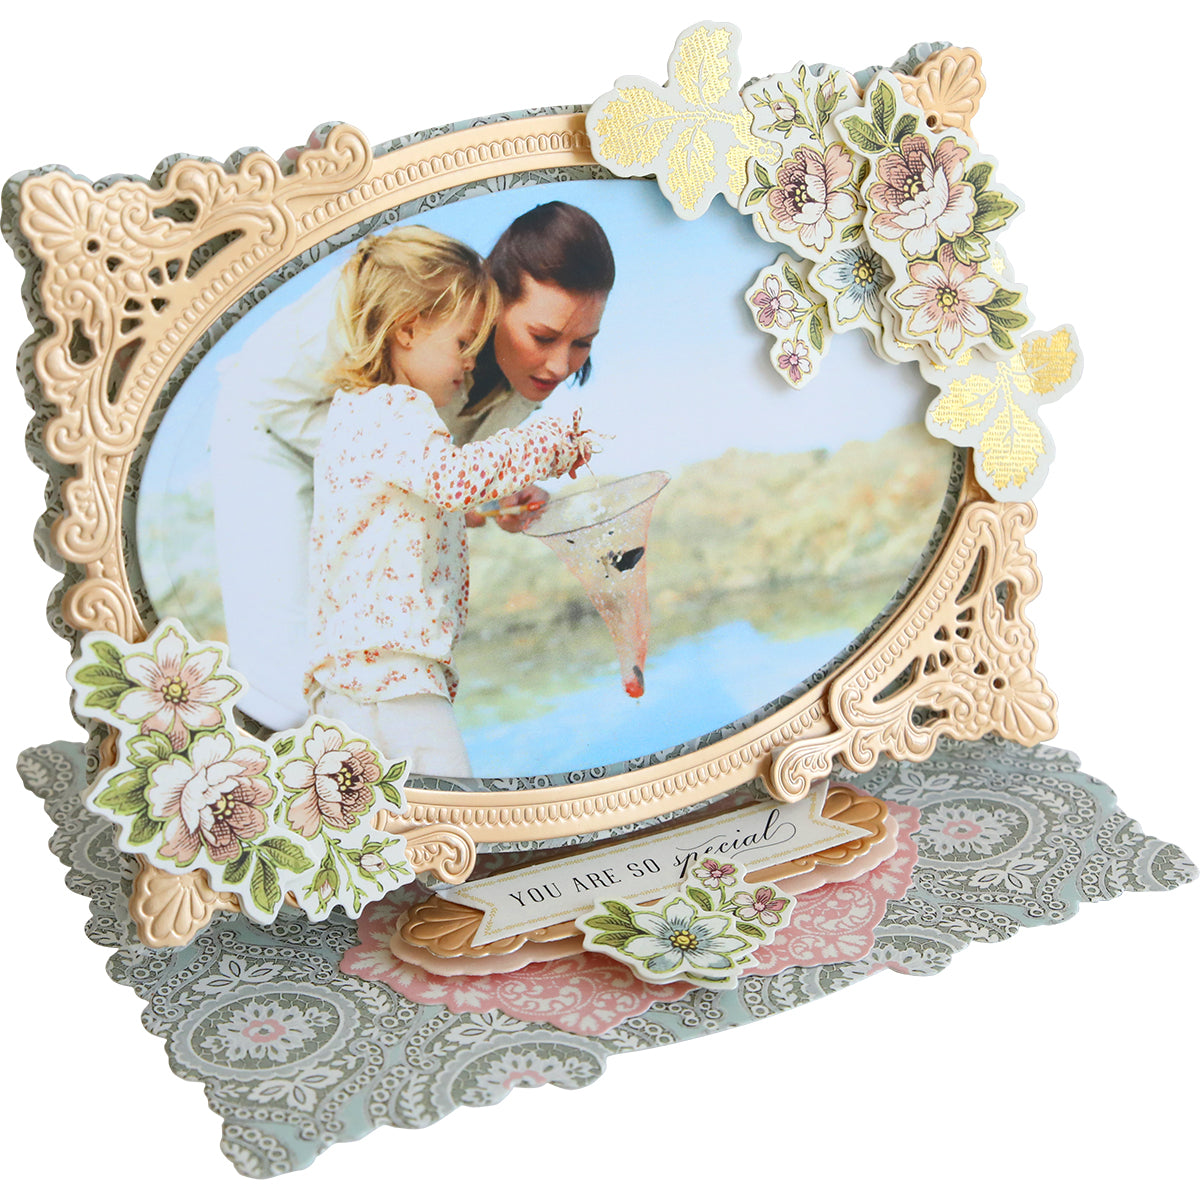 An Anna Griffin Photo Finish Easel Card Dies featuring a family photo of a girl and a boy.